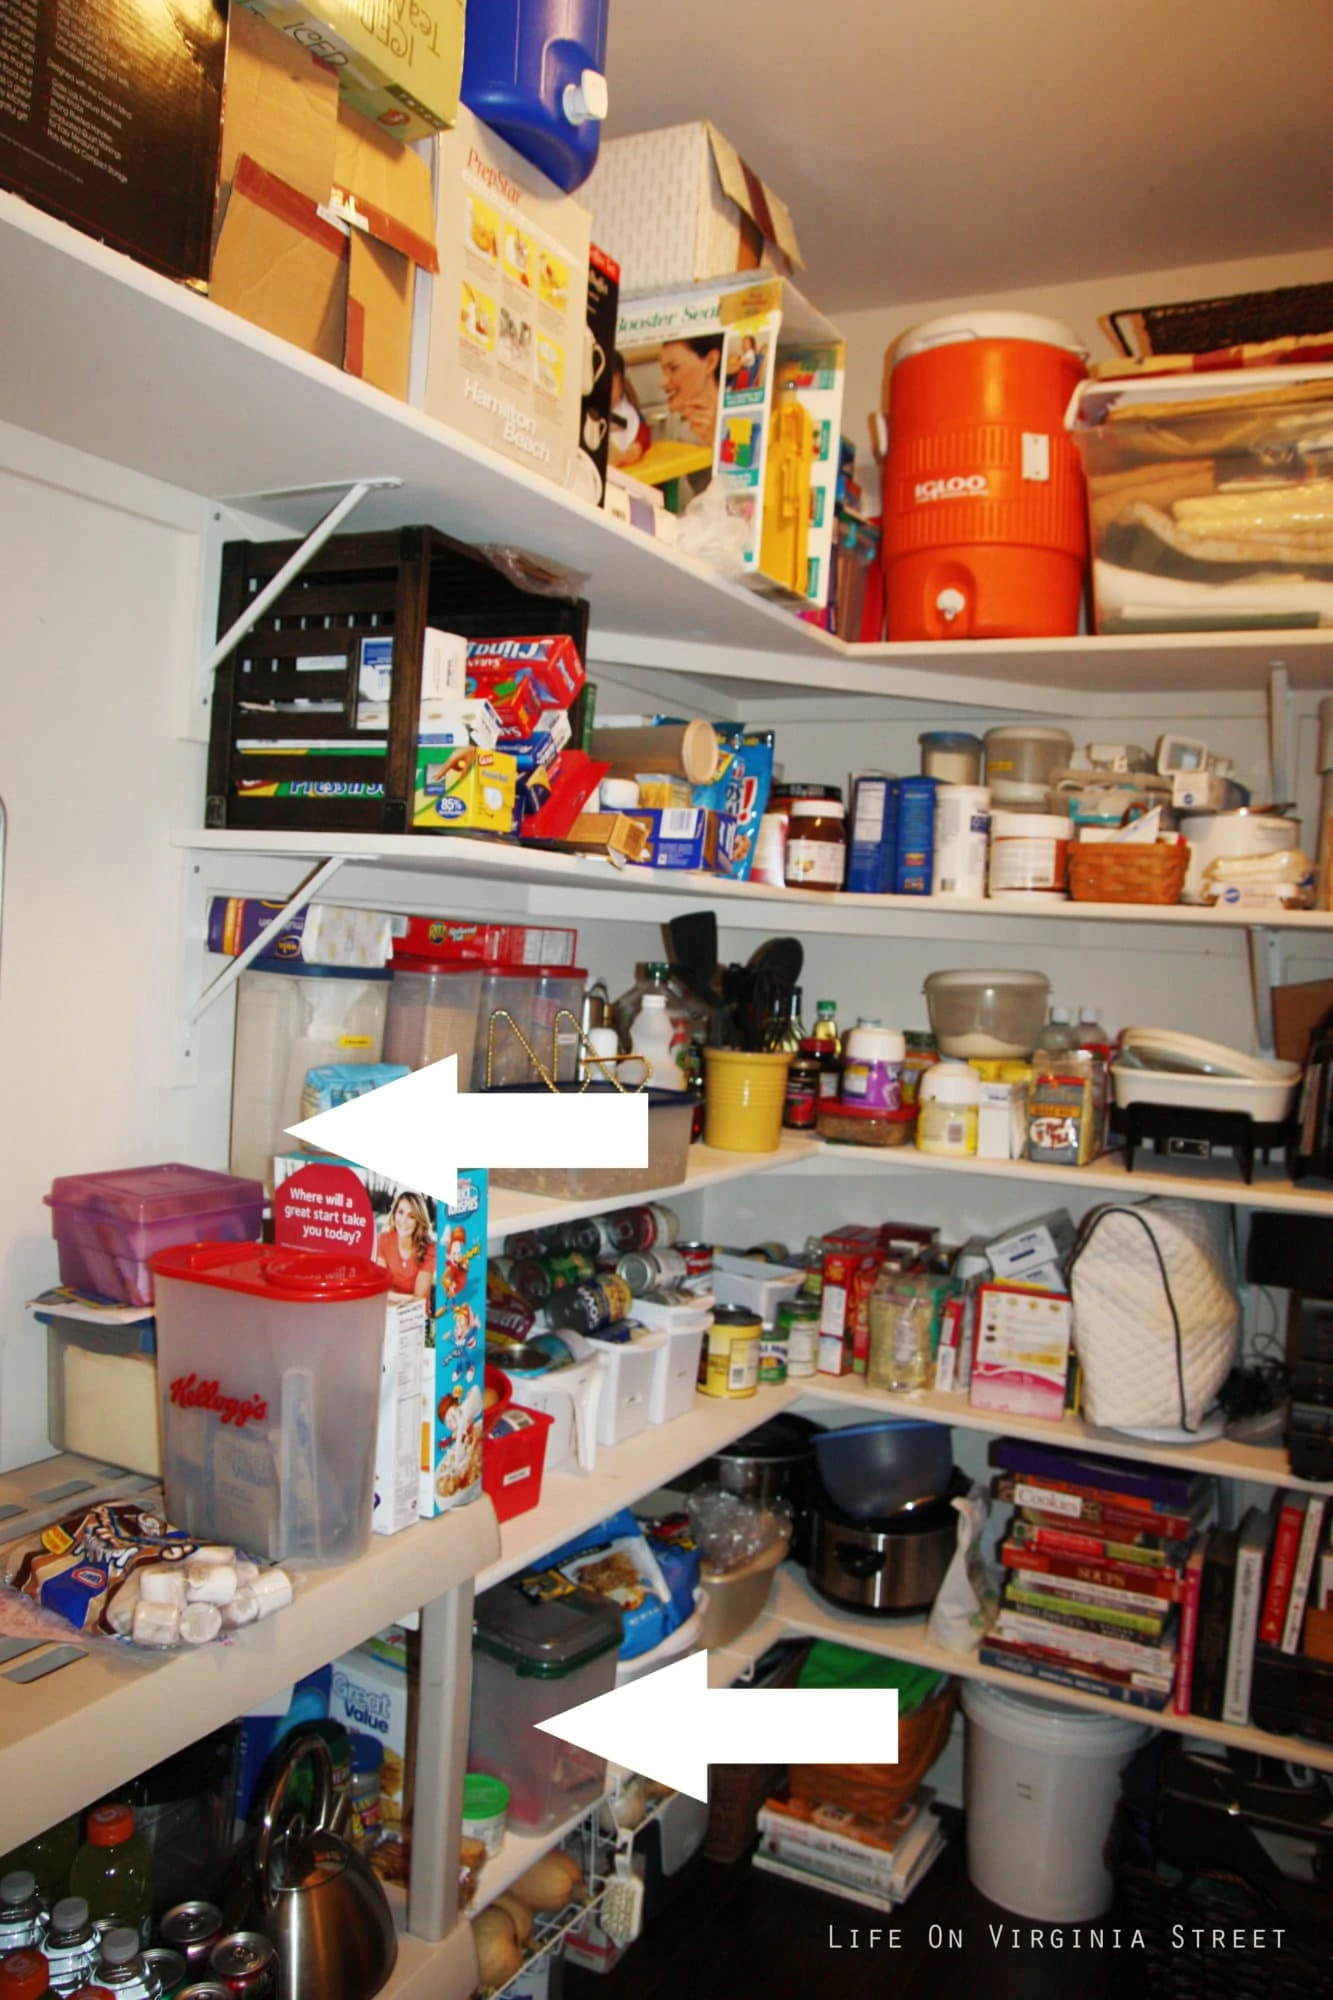 Cluttered pantry shelves.